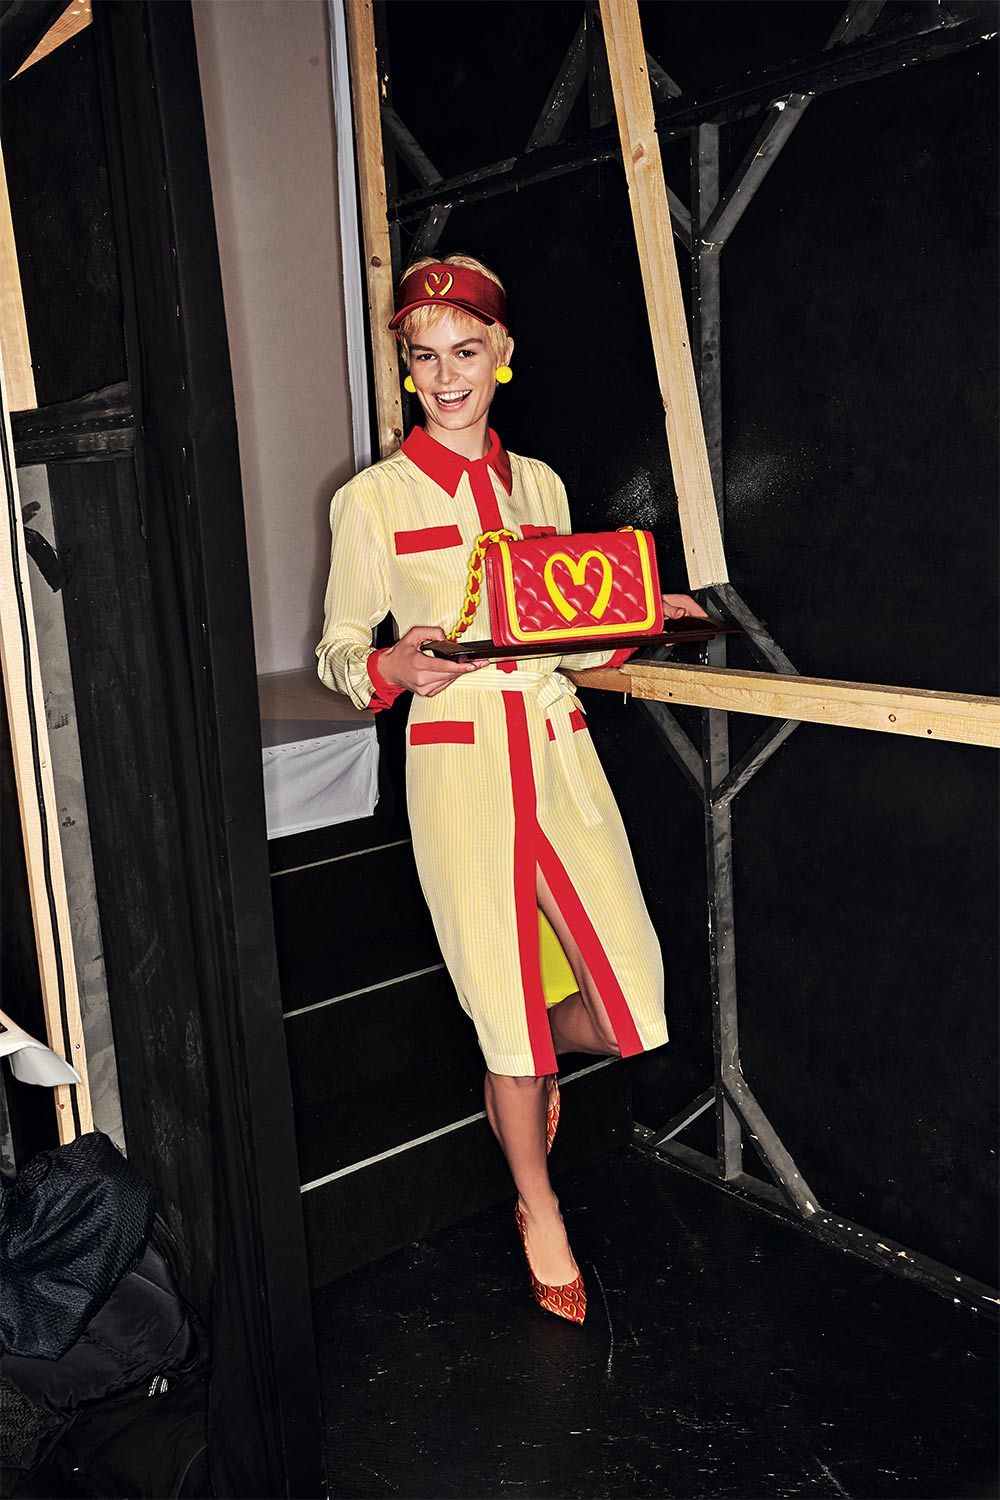 Fall Winter 2014, Anna Ewers from the book "Moschino".